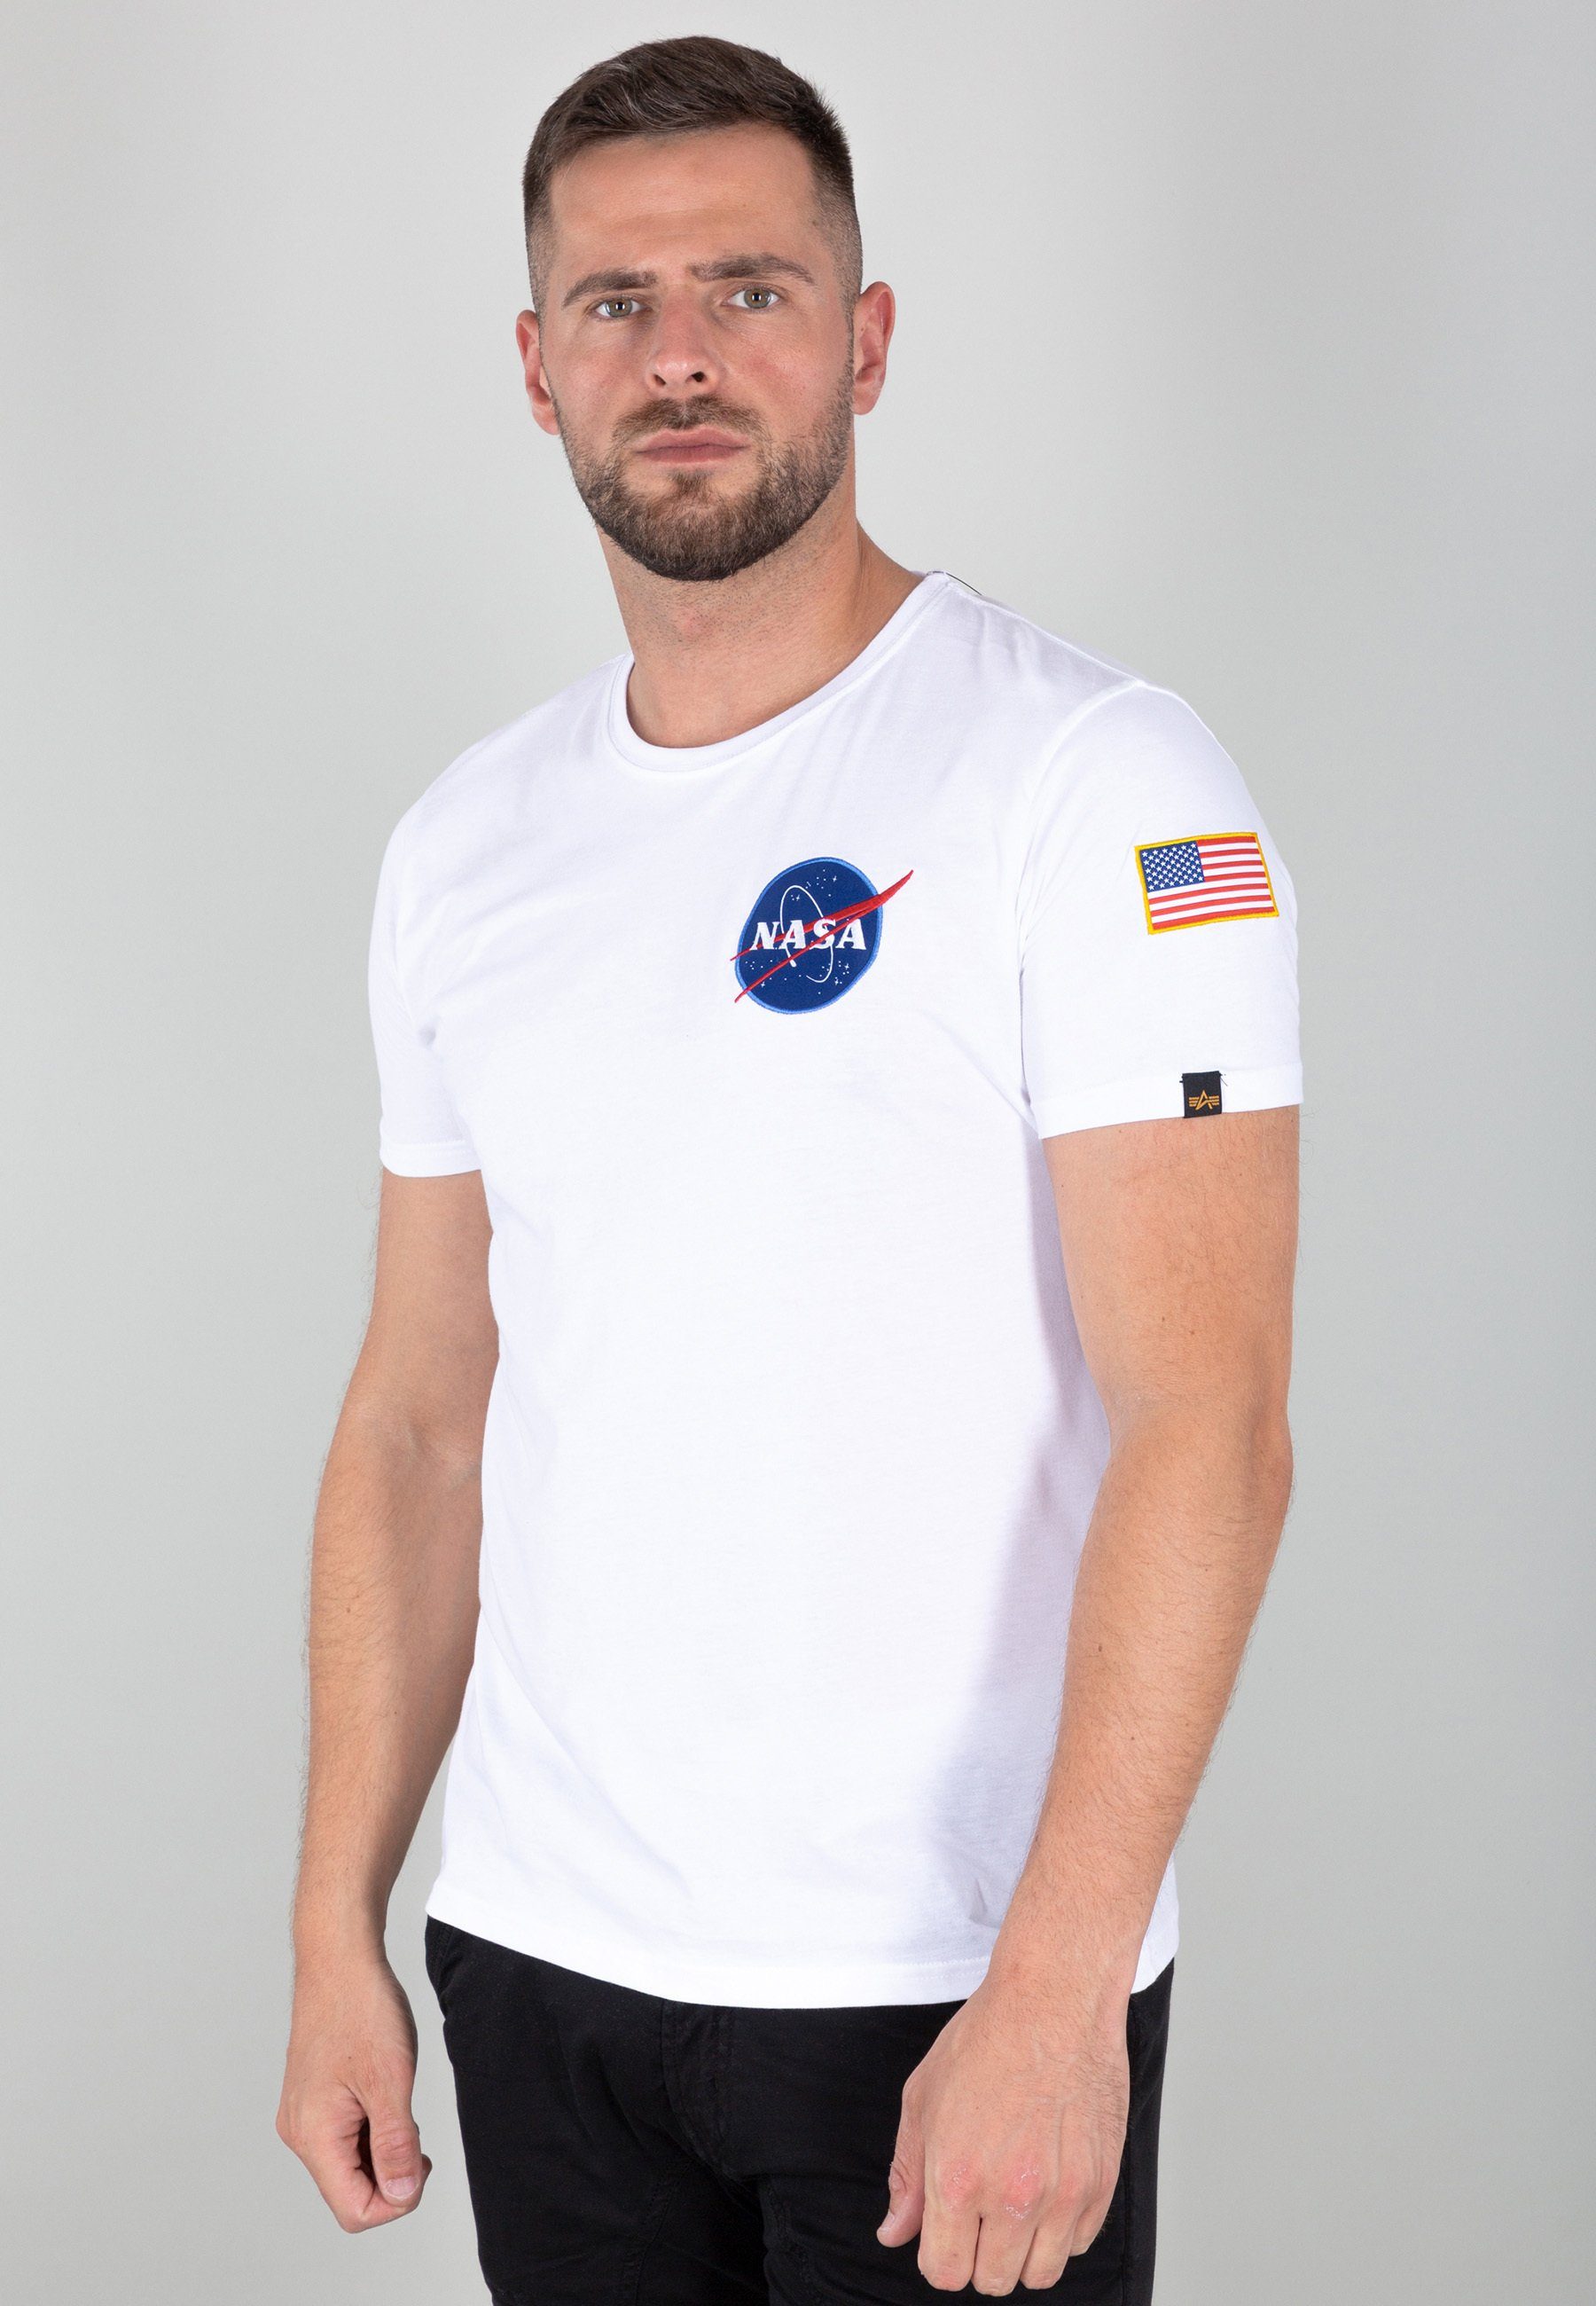 Alpha Men Industries T-Shirts OTTO Space online kopen | Alpha - Industries T T-shirt Shuttle